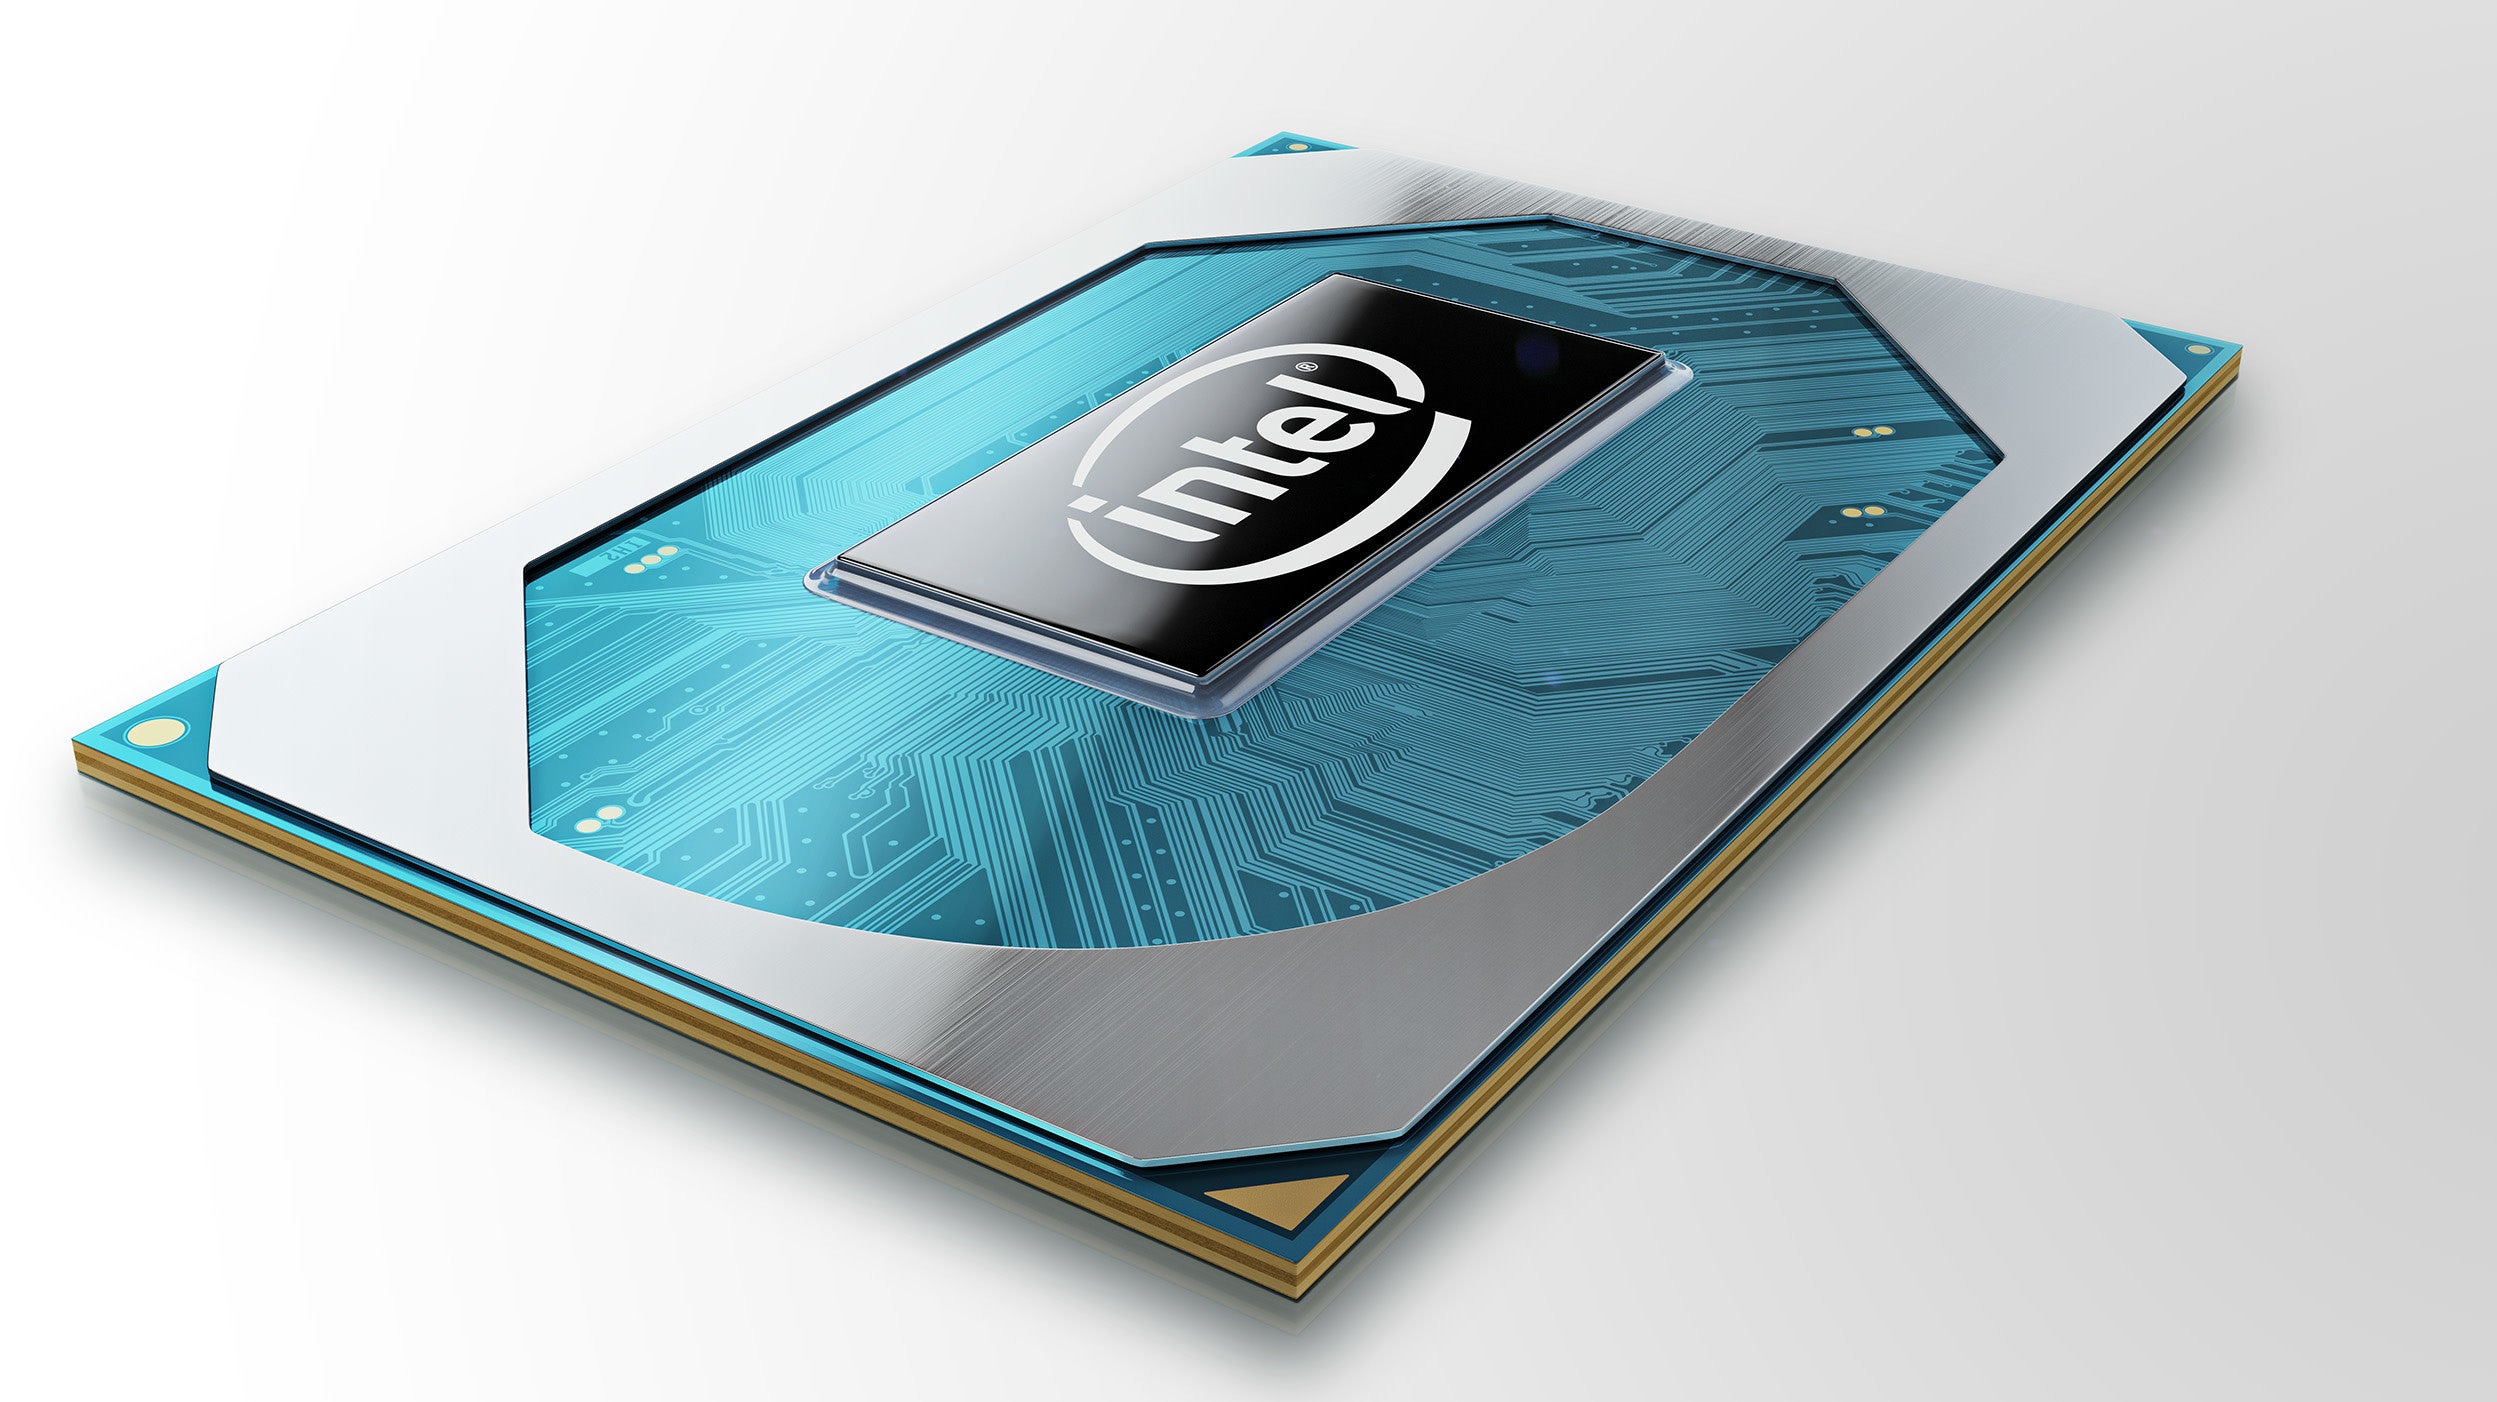 Intel’s New Desktop Processors Take A Very Intel Approach To Challenging AMD